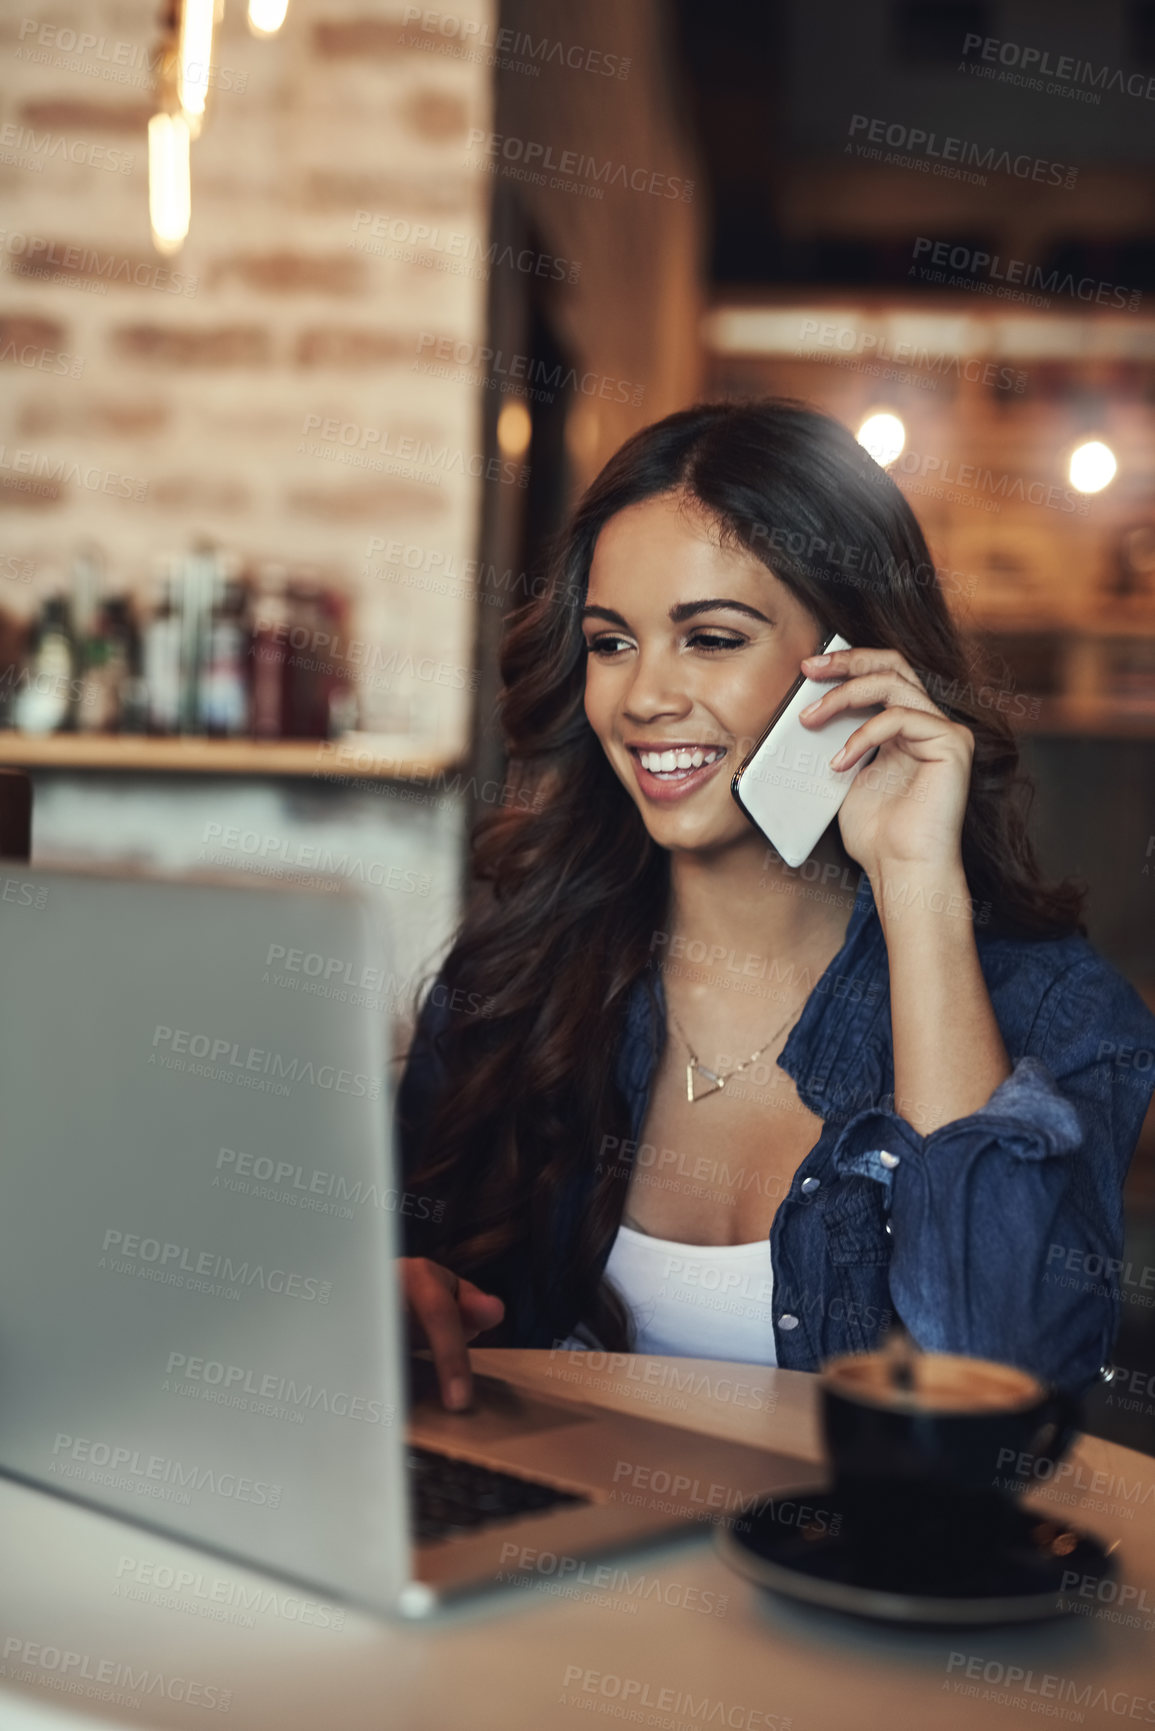 Buy stock photo Shot of a young woman answering her cellphone while using her laptop in a coffee shop